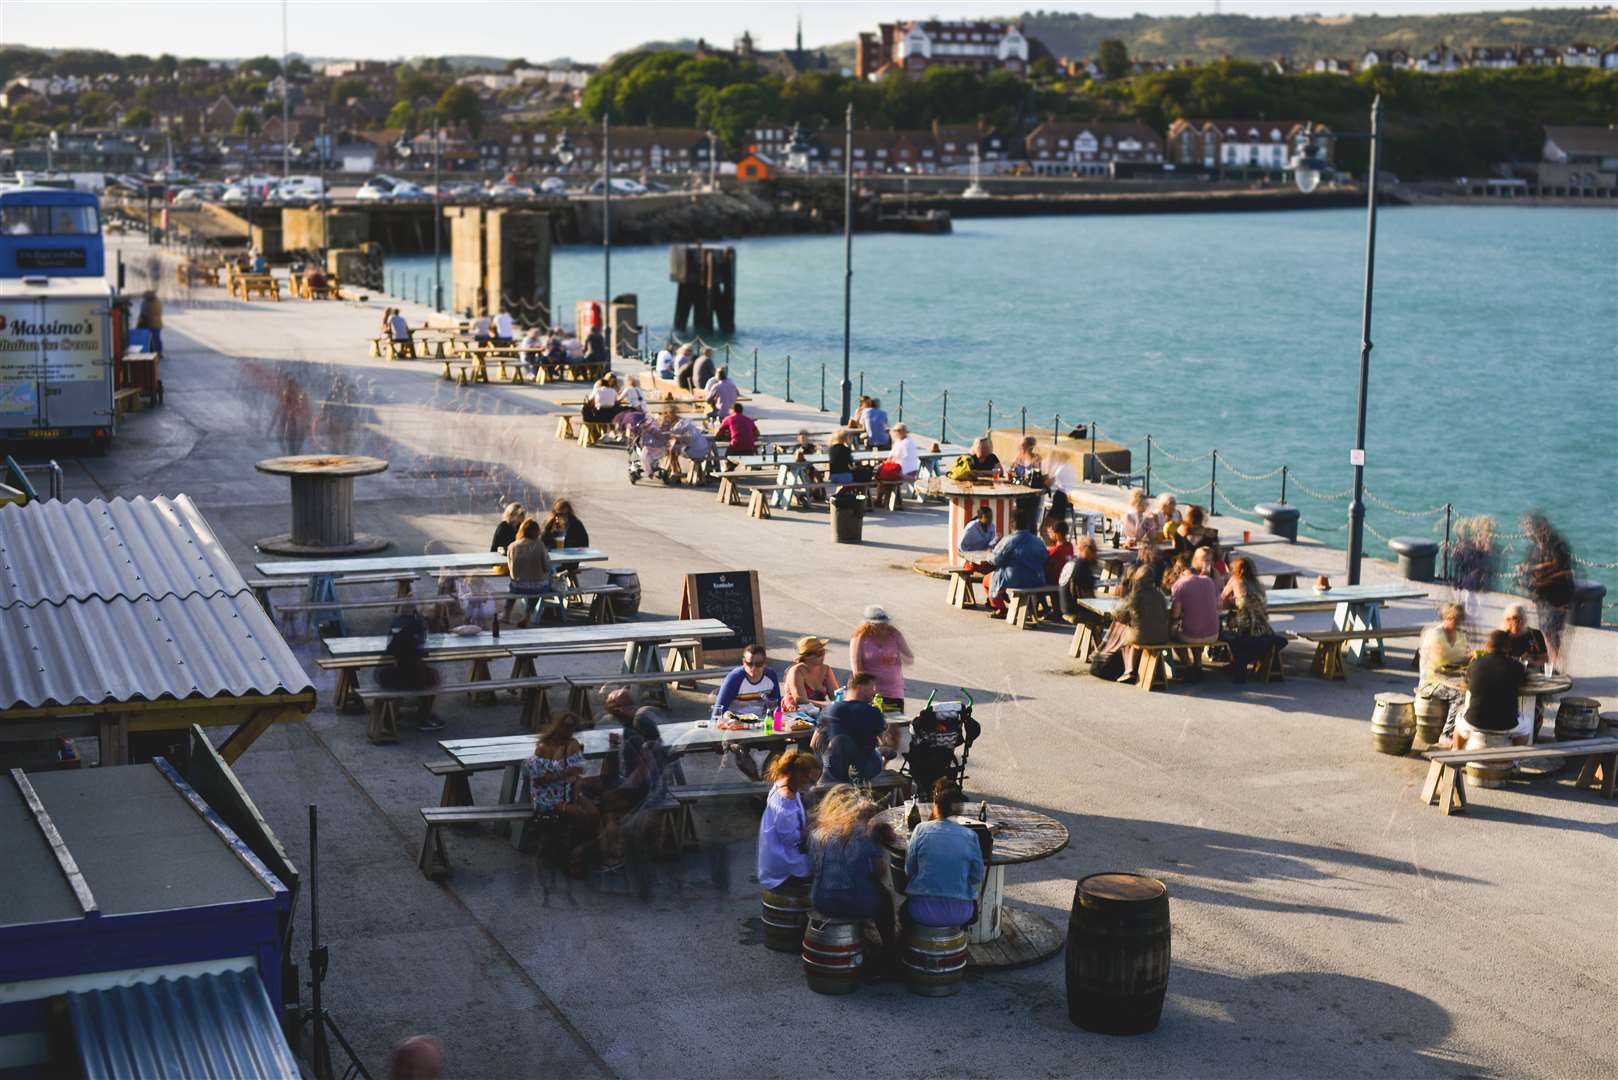 Folkestone Harbour Arm is a symbol of the town's recent regeneration. Picture: Folkestone Harbour Arm